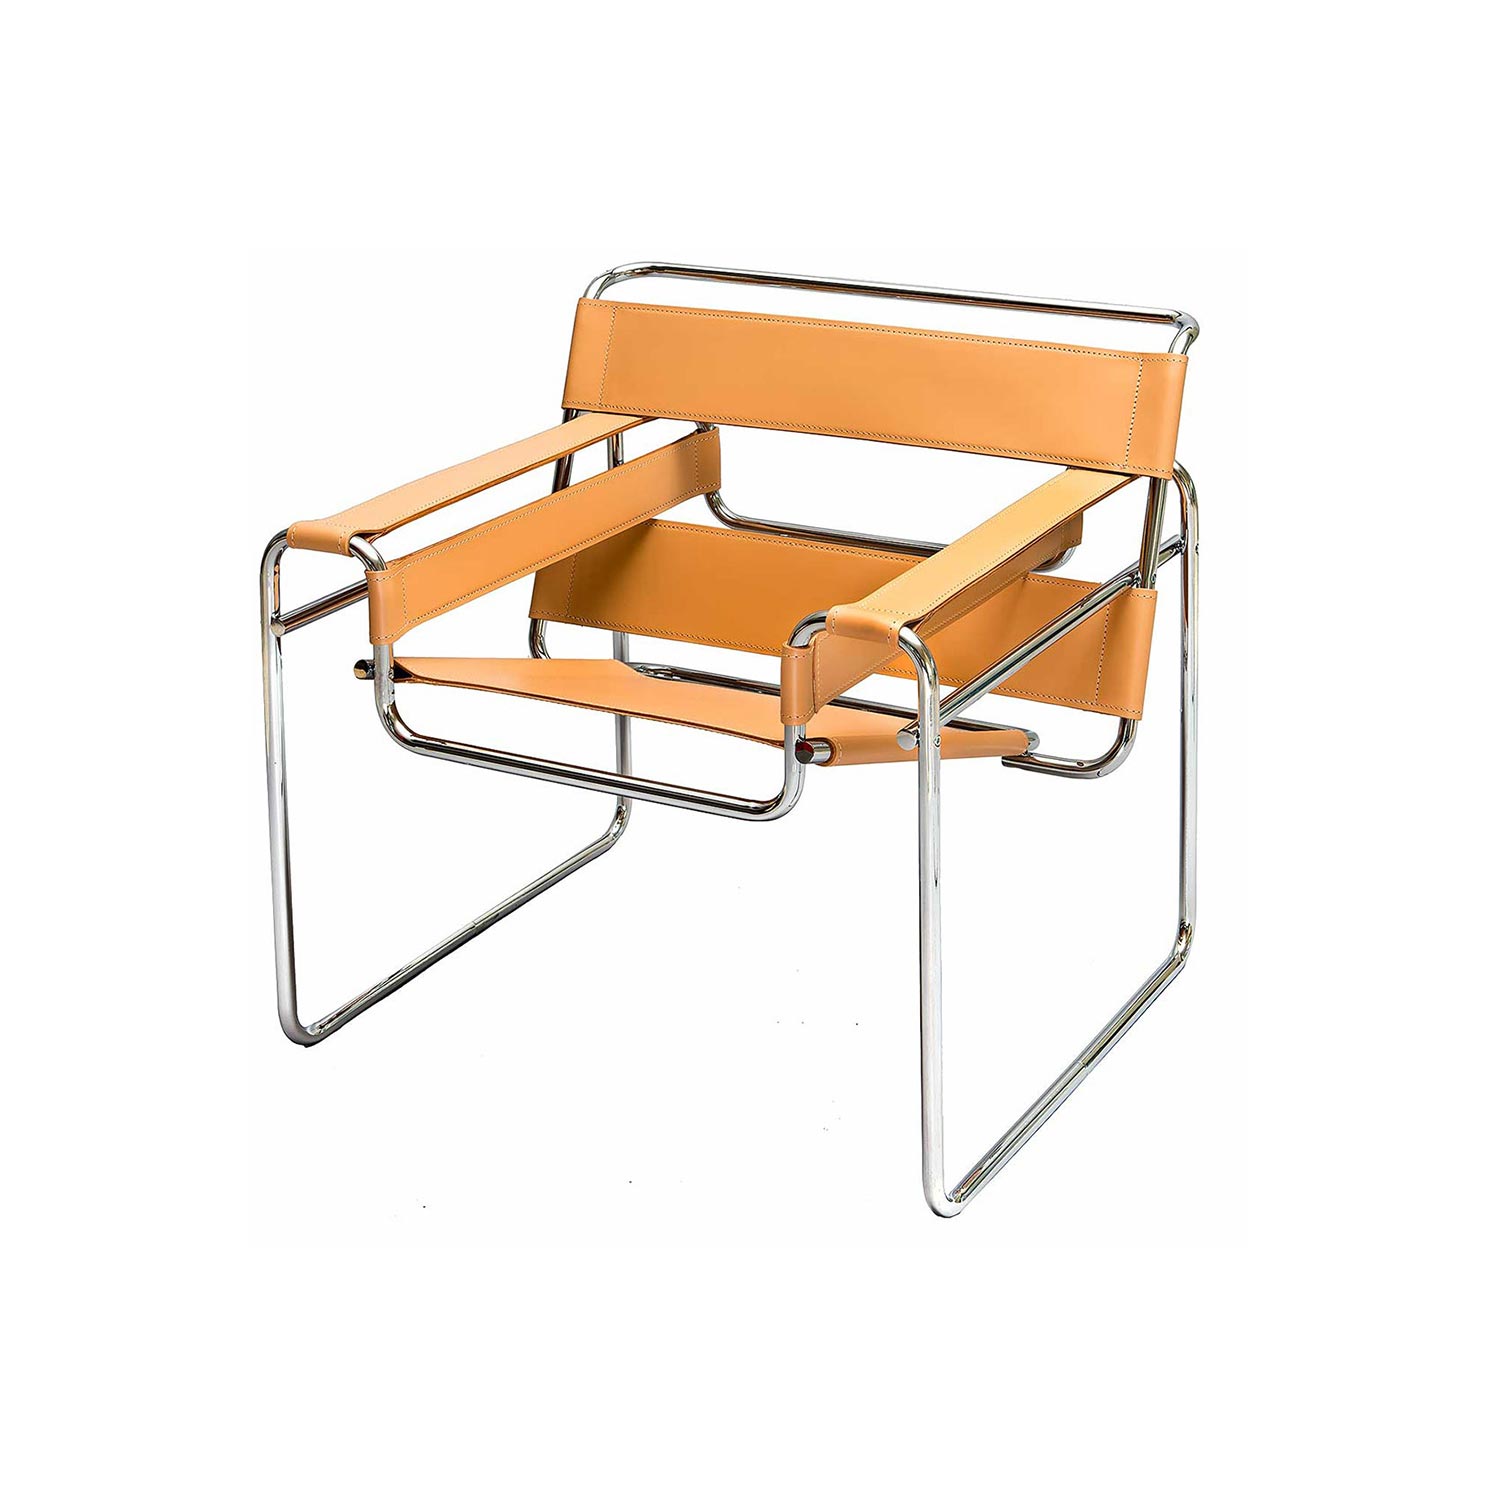 Wassily Chair Designed By Marcel Breuer Steelform Design Classics